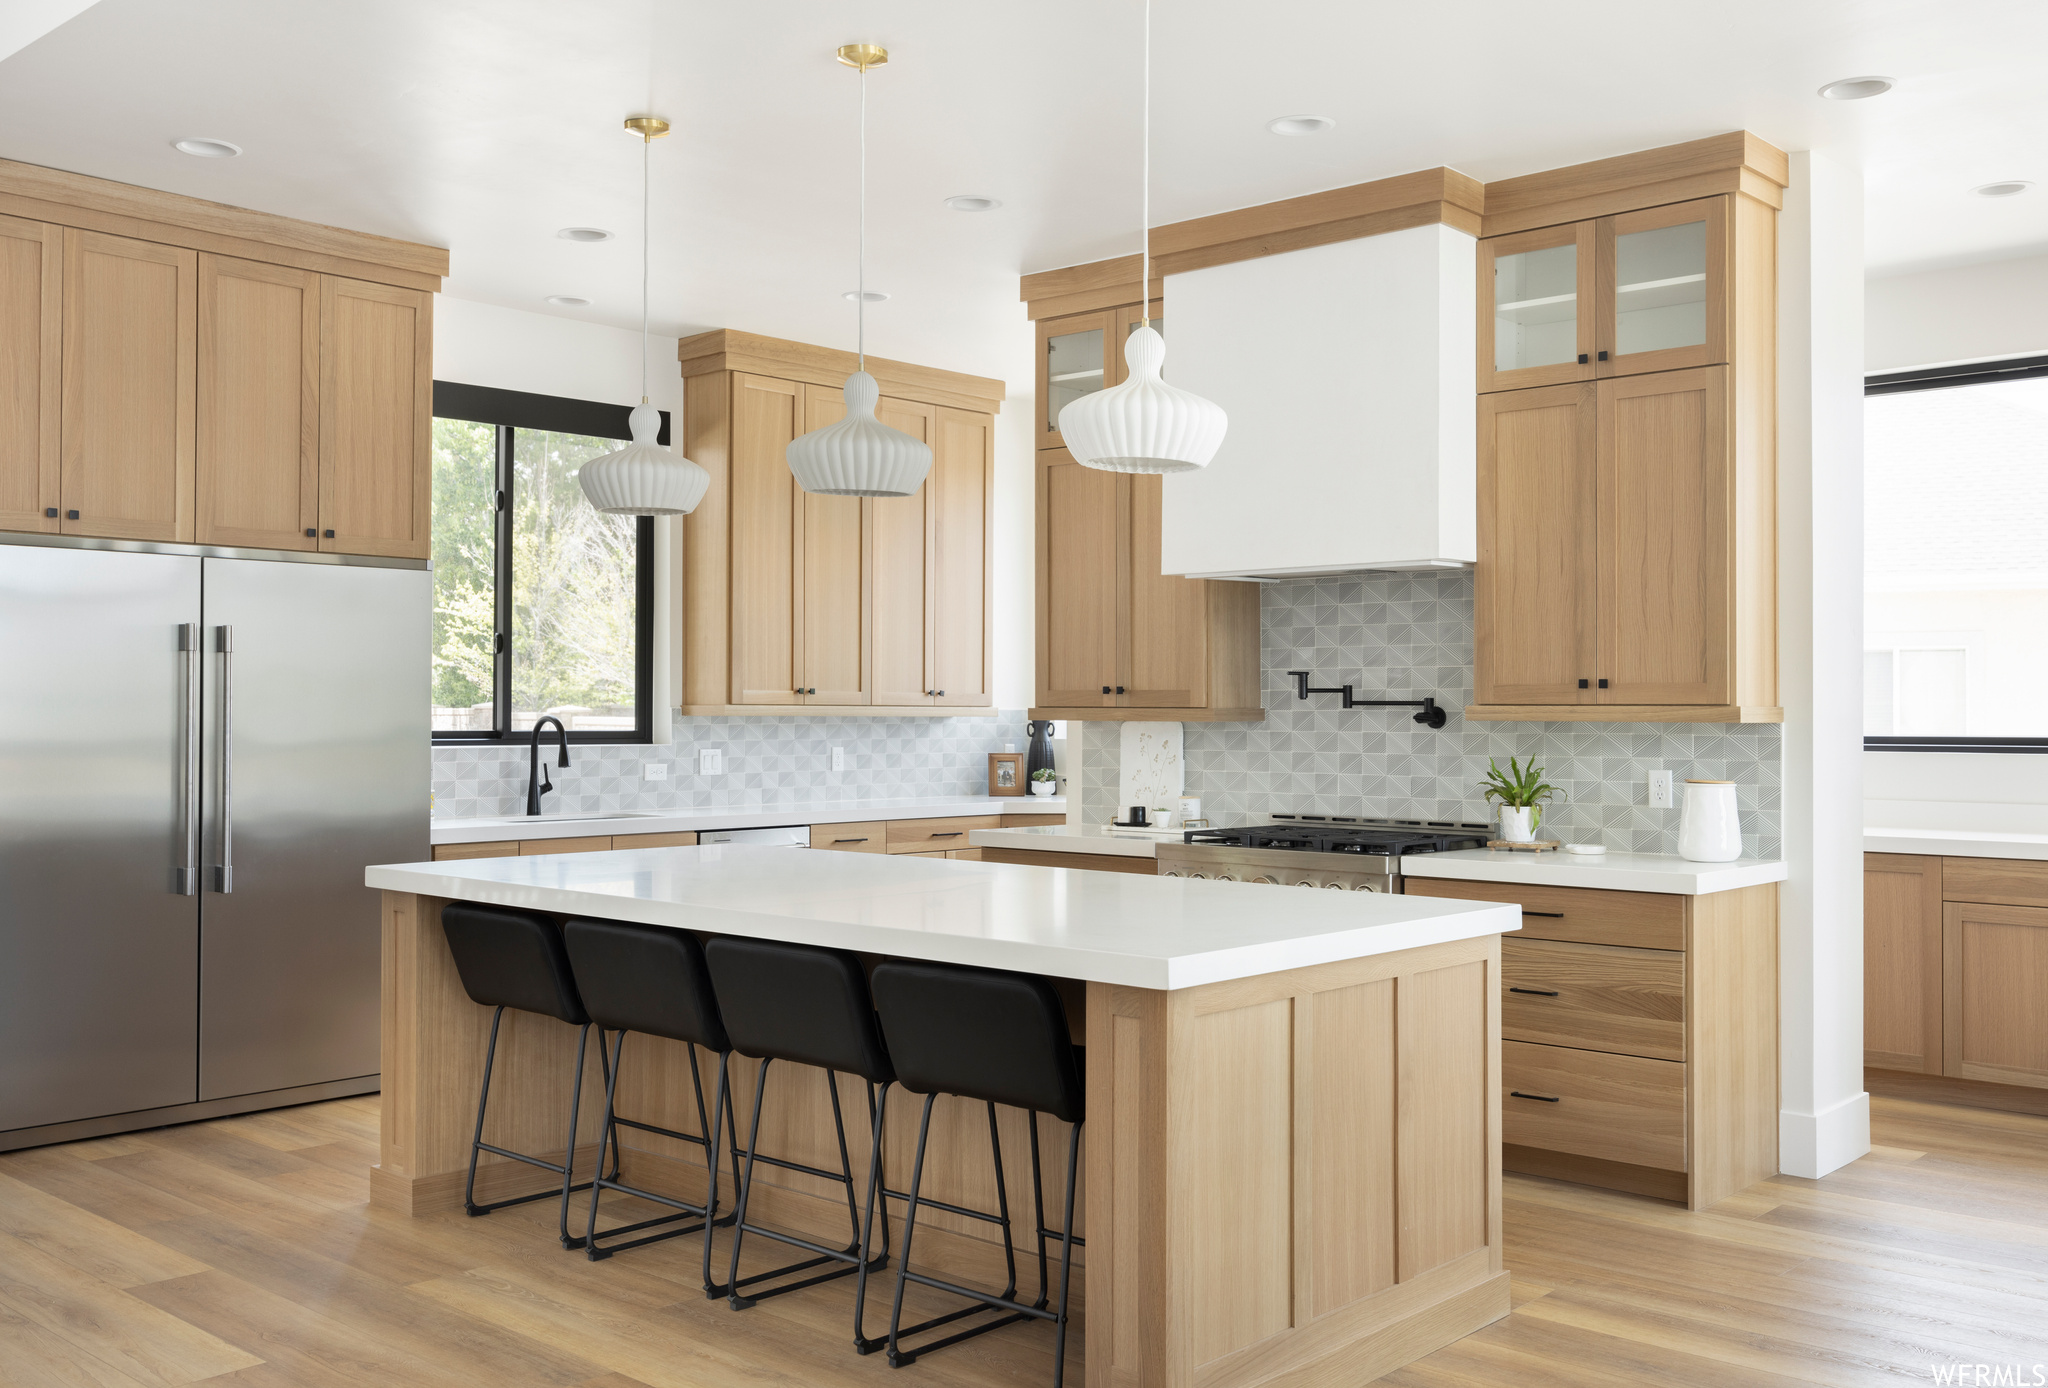 Kitchen with hanging light fixtures, a kitchen island, built in fridge, and light hardwood / wood-style floors